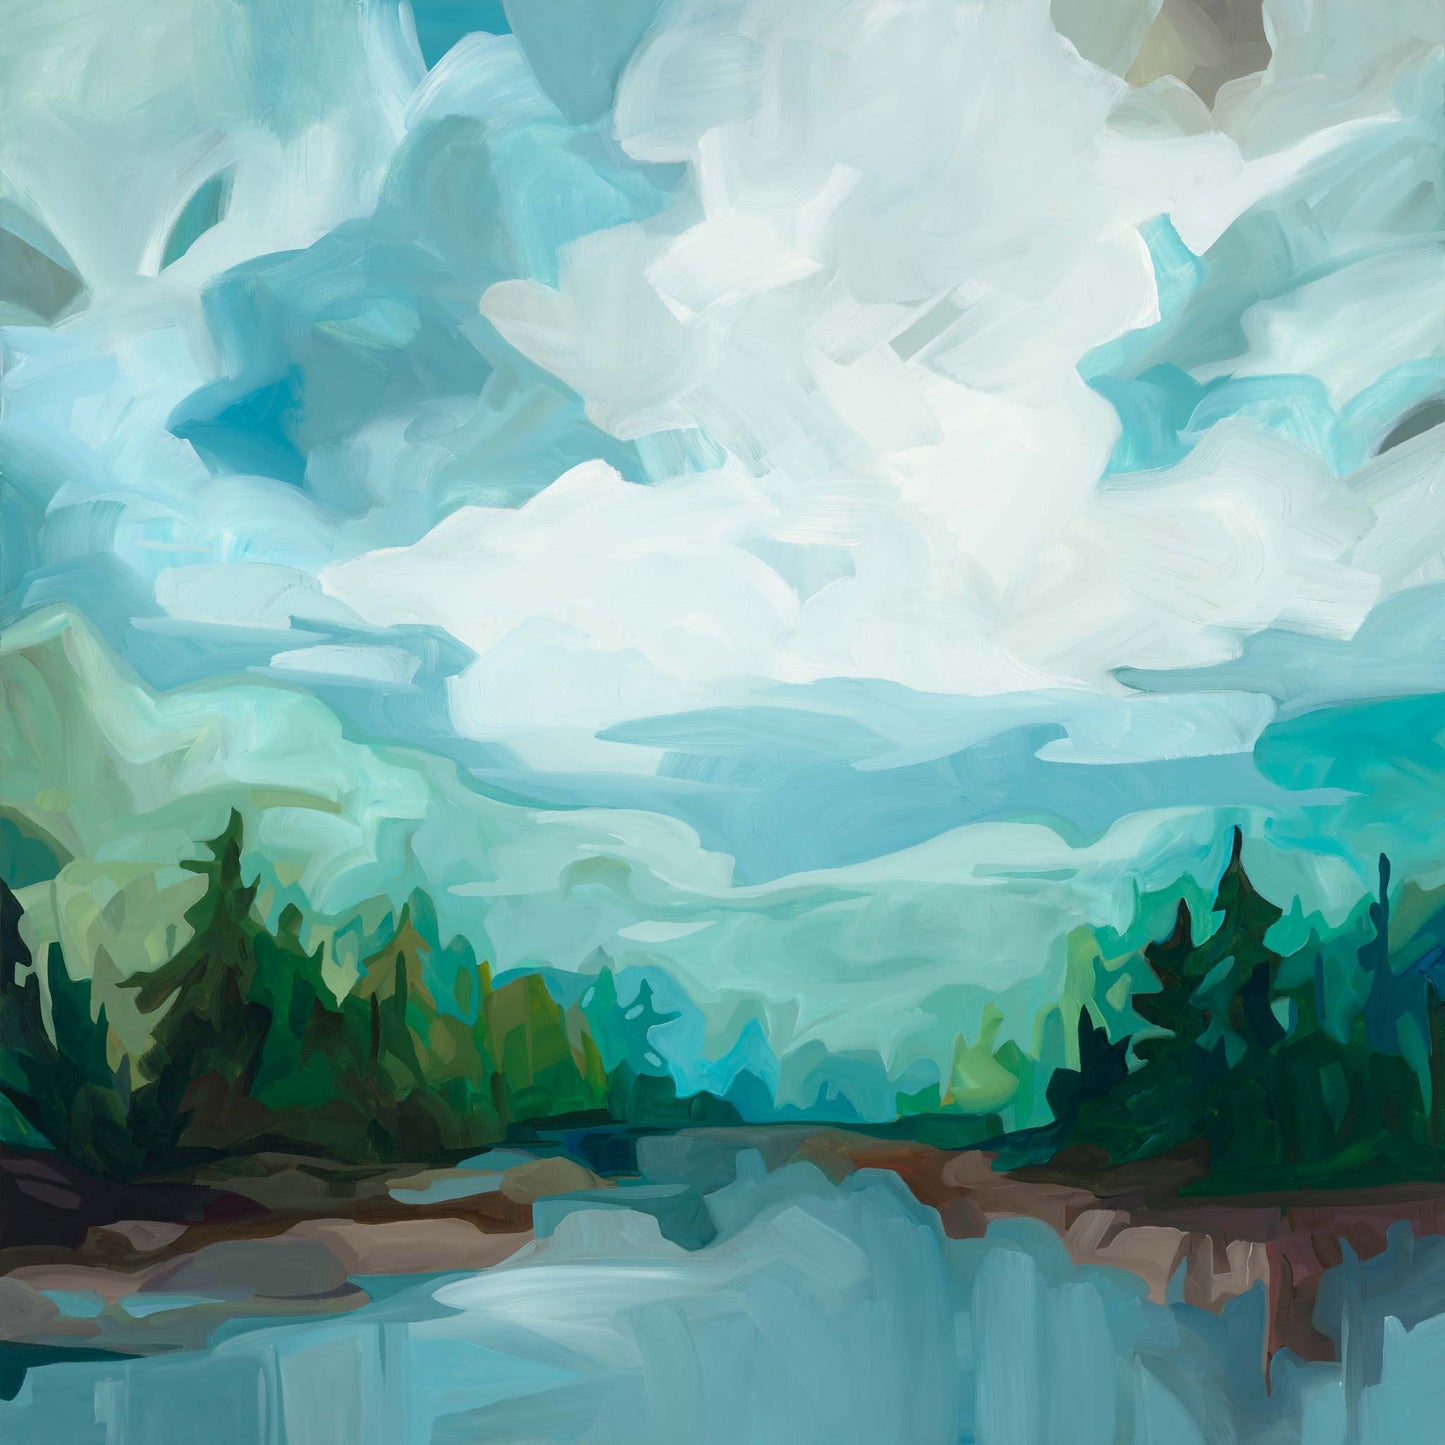 Blue Spruce' lake scene painting fine art print by Canadian abstract artist Susannah Bleasby